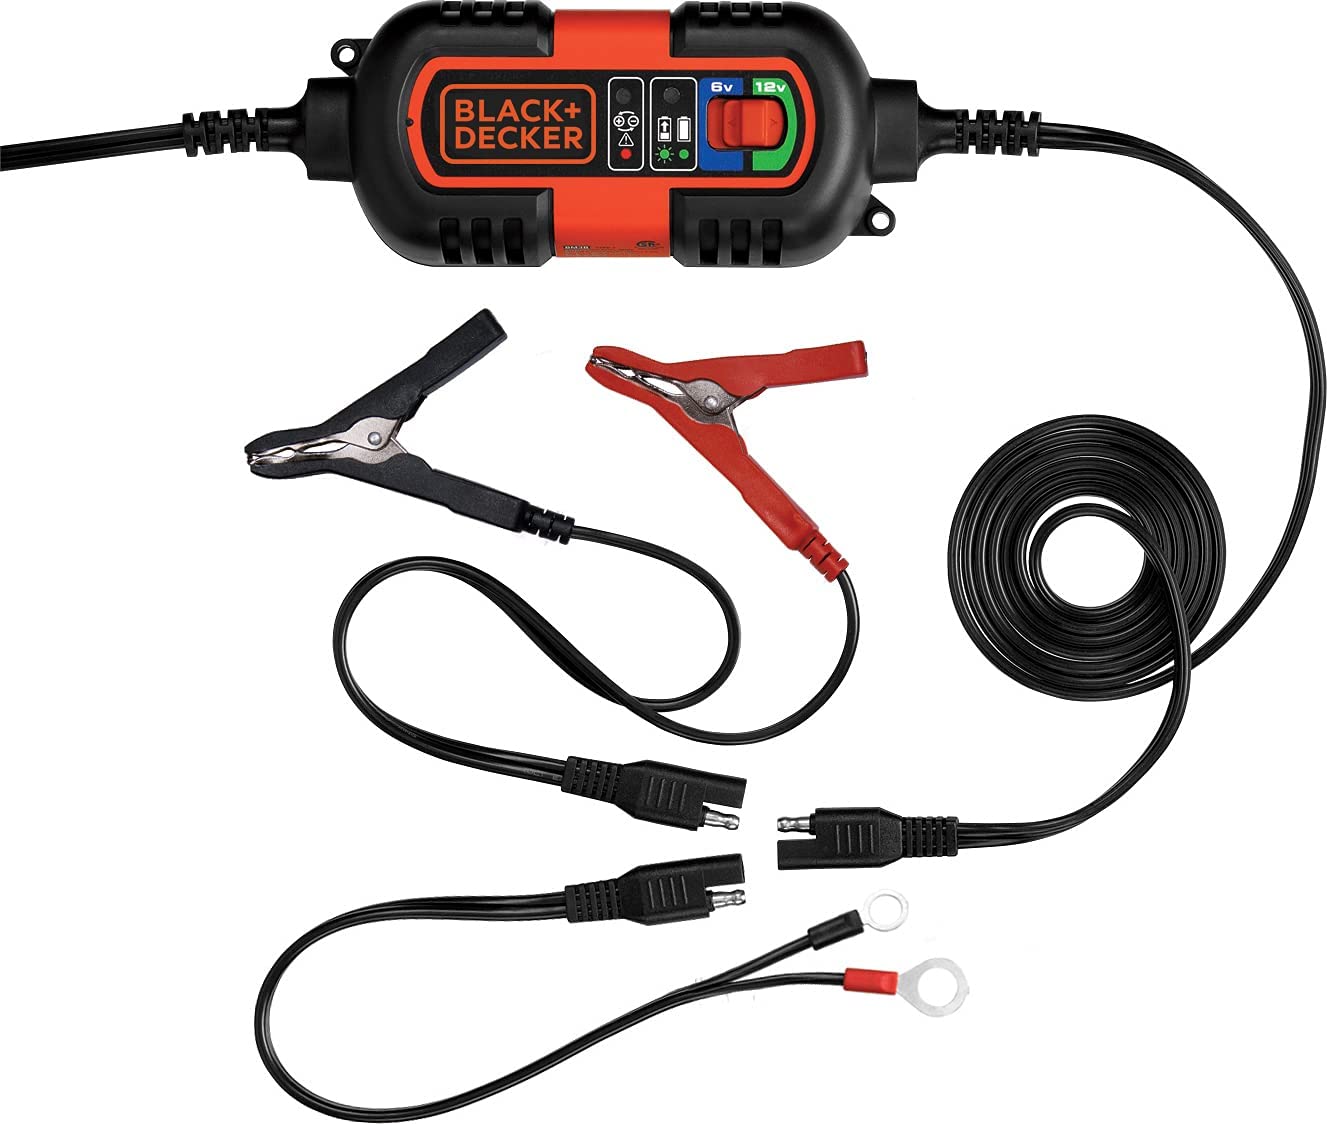  BLACK+DECKER BC25BD Fully Automatic 25 Amp 12V Bench Battery  Charger/Maintainer with 75A Engine Start, Alternator Check, Cable Clamps :  Automotive